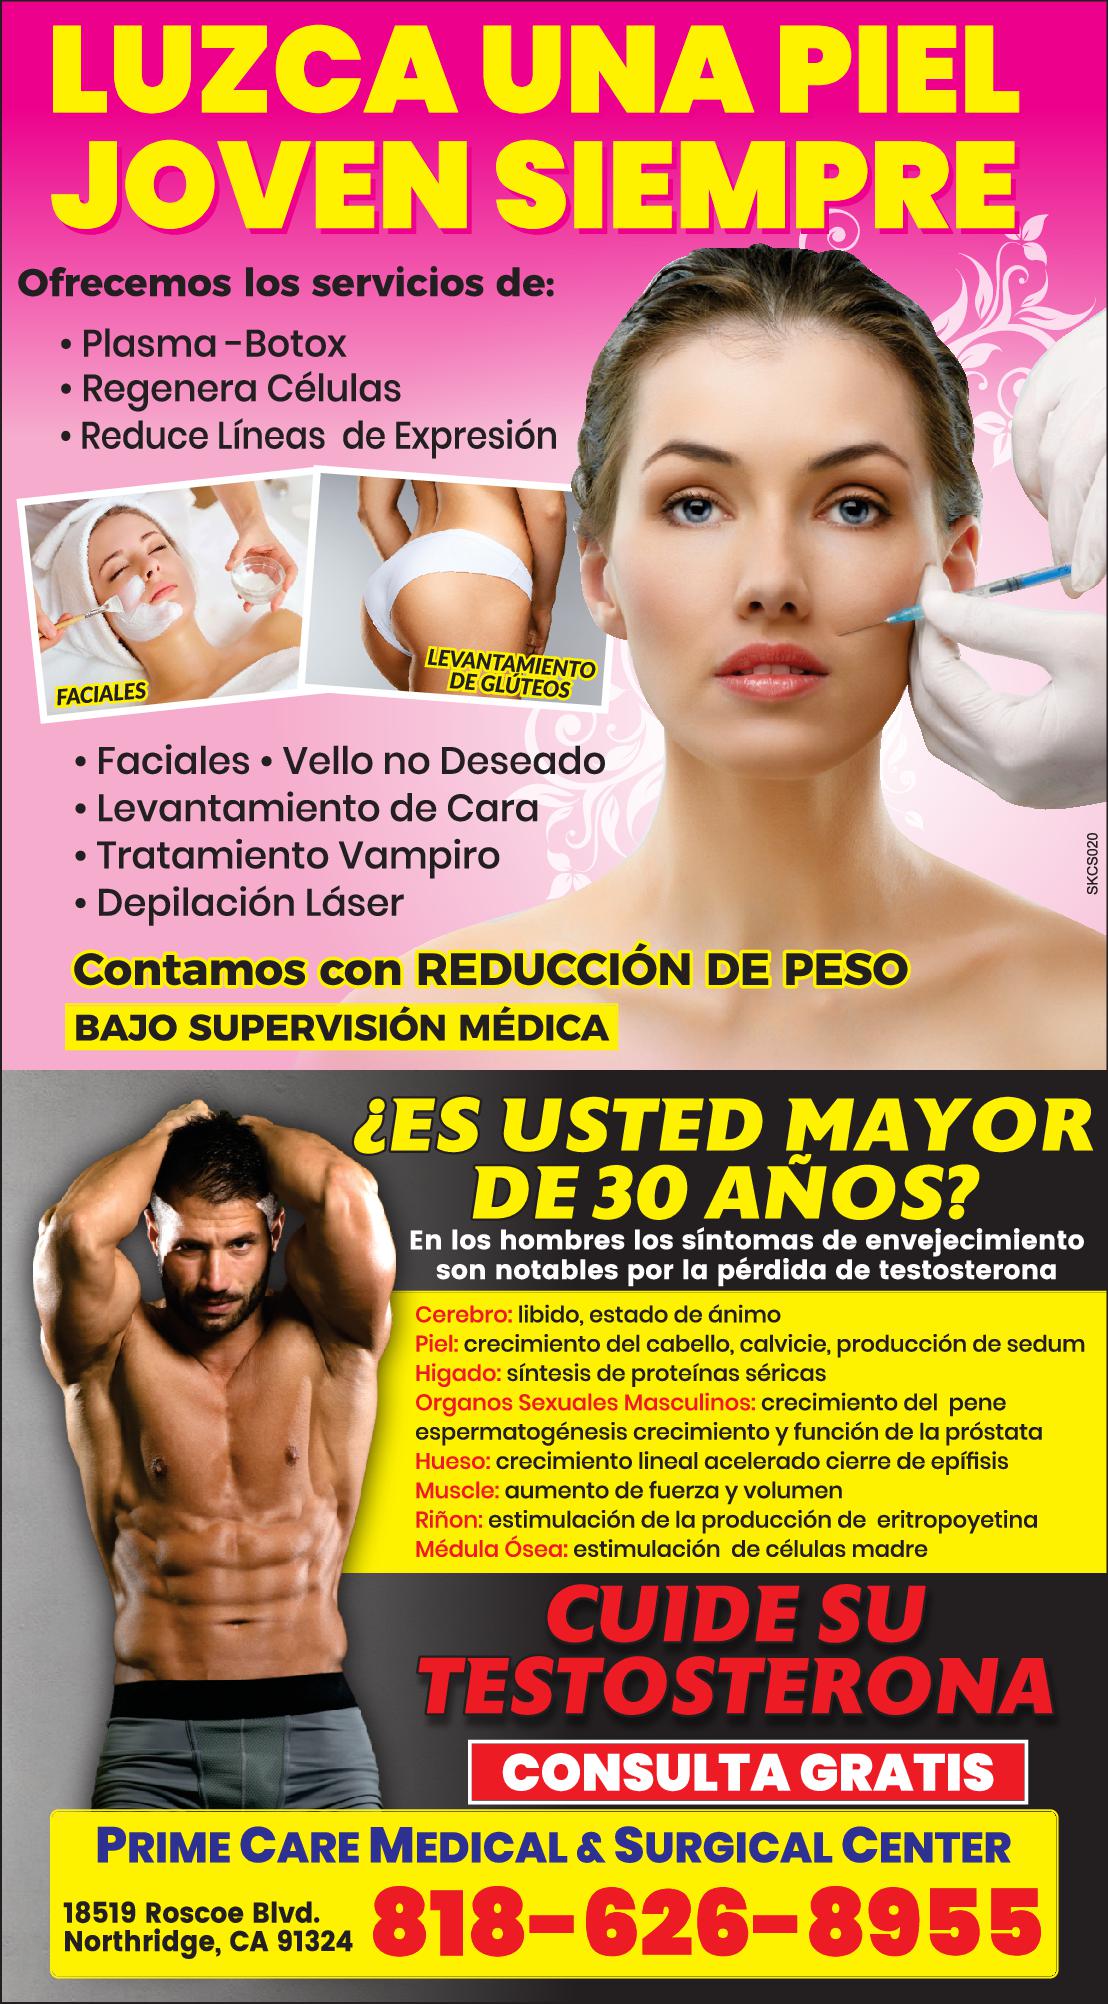 Skin Care Surgical Center